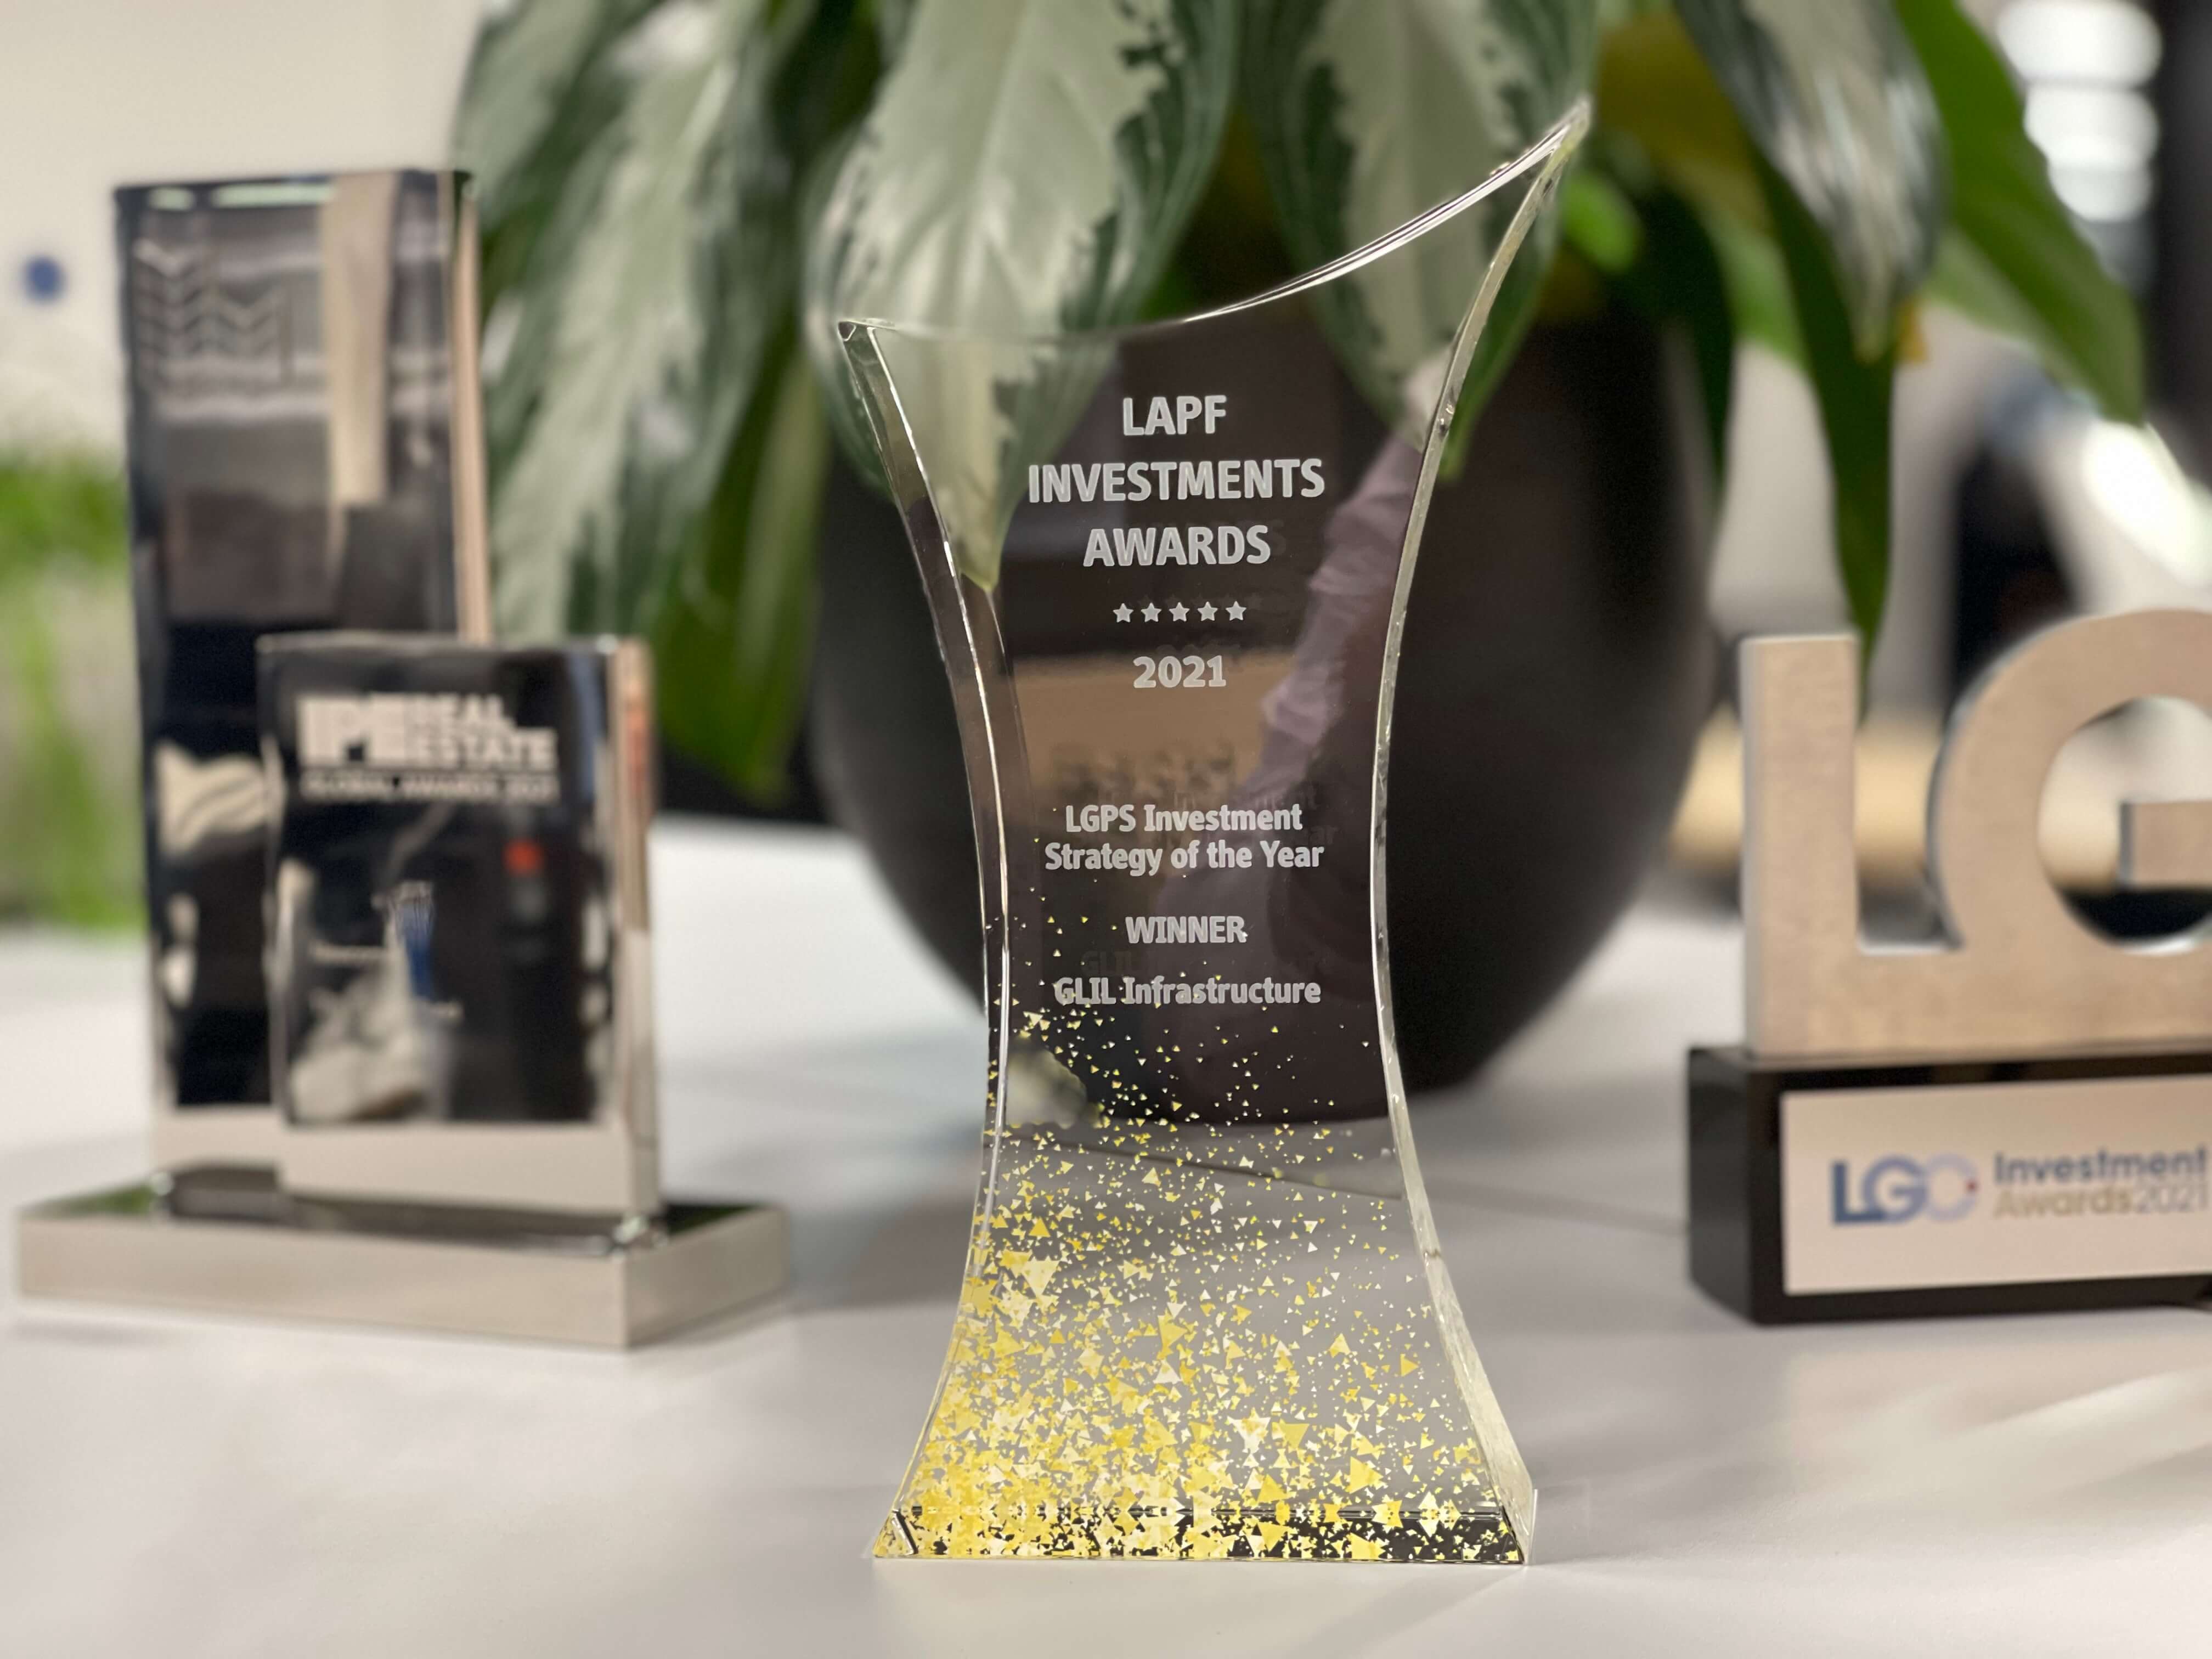 LPP LAPF Investments Awards 2021 - GLIL Infrastructure - Winner of LGPS Investment Strategy of the Year Icon